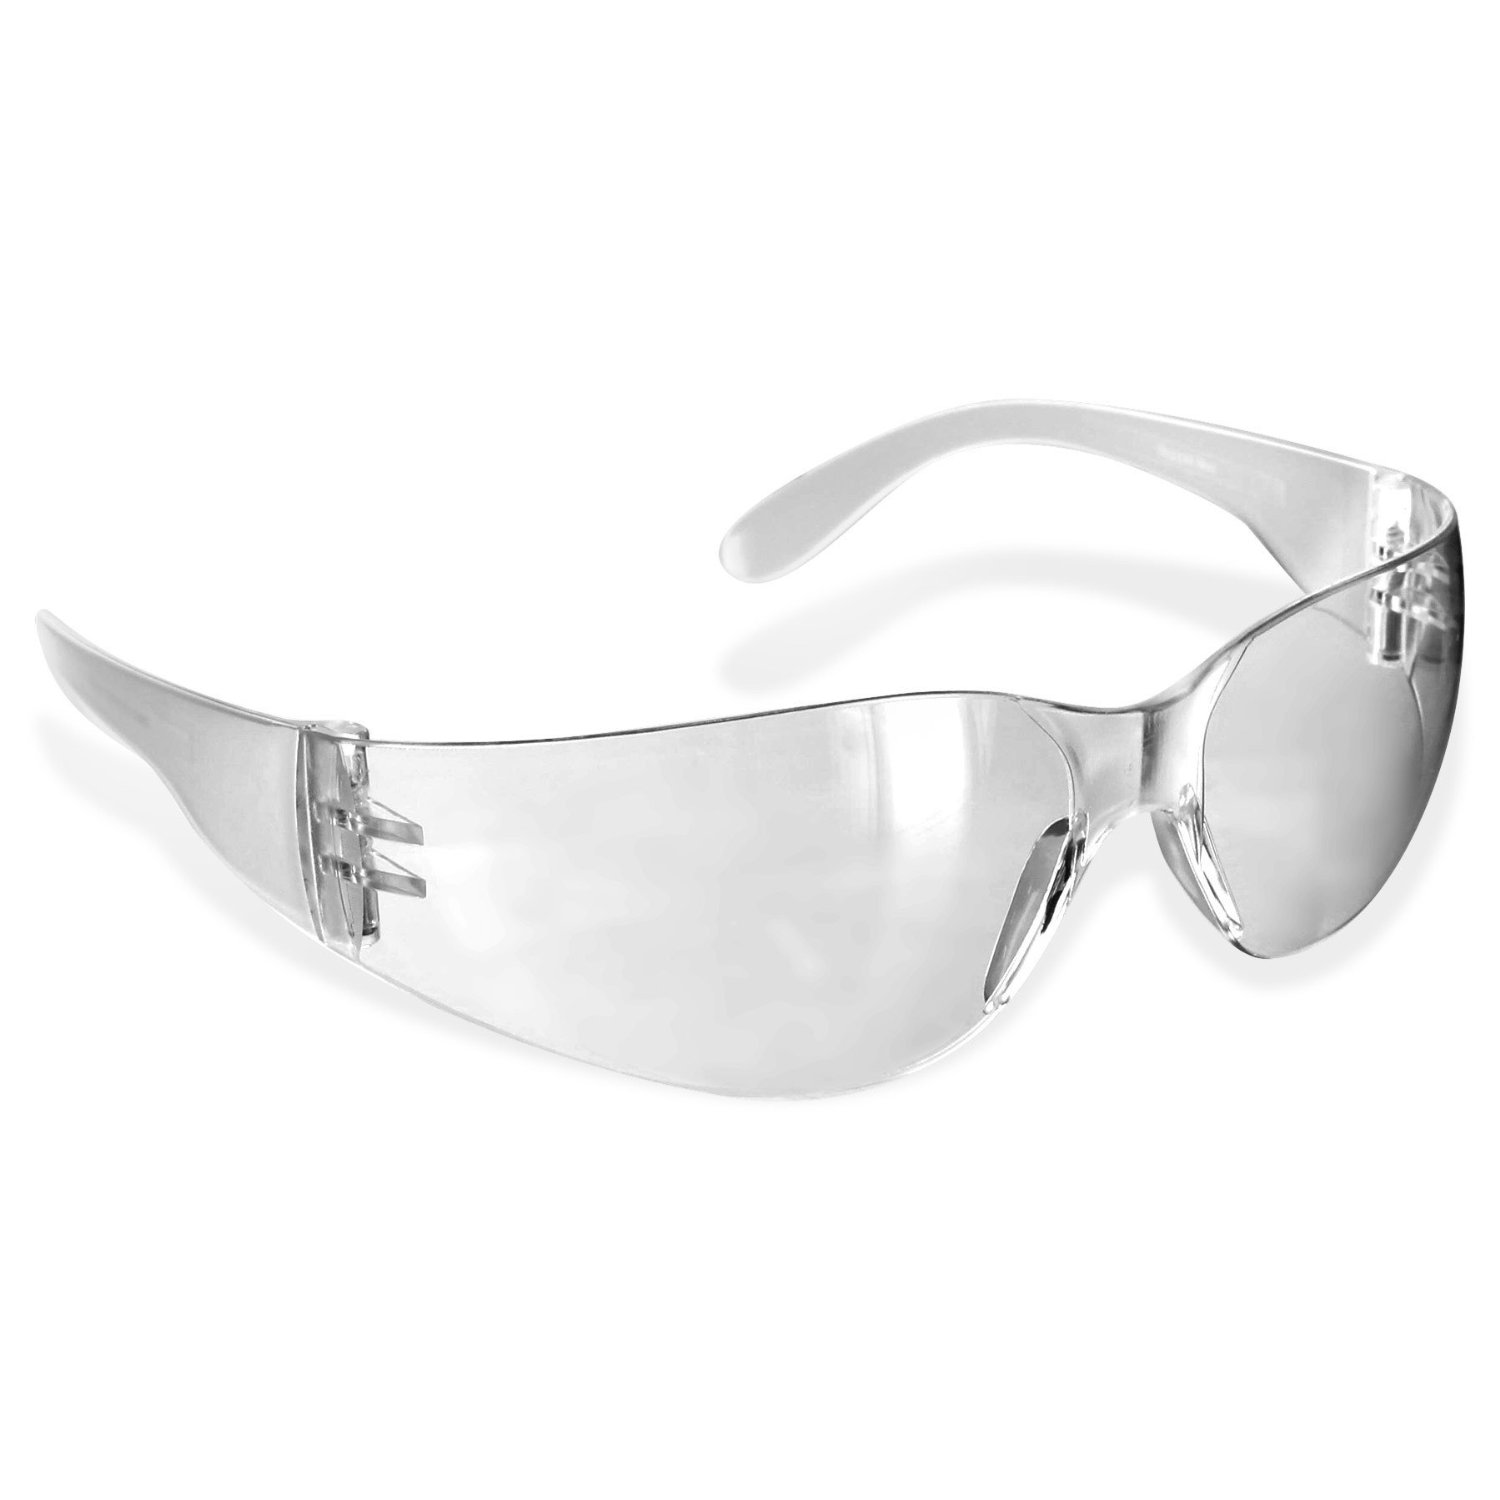 12 pack safety glasses in smoke, clear or amber